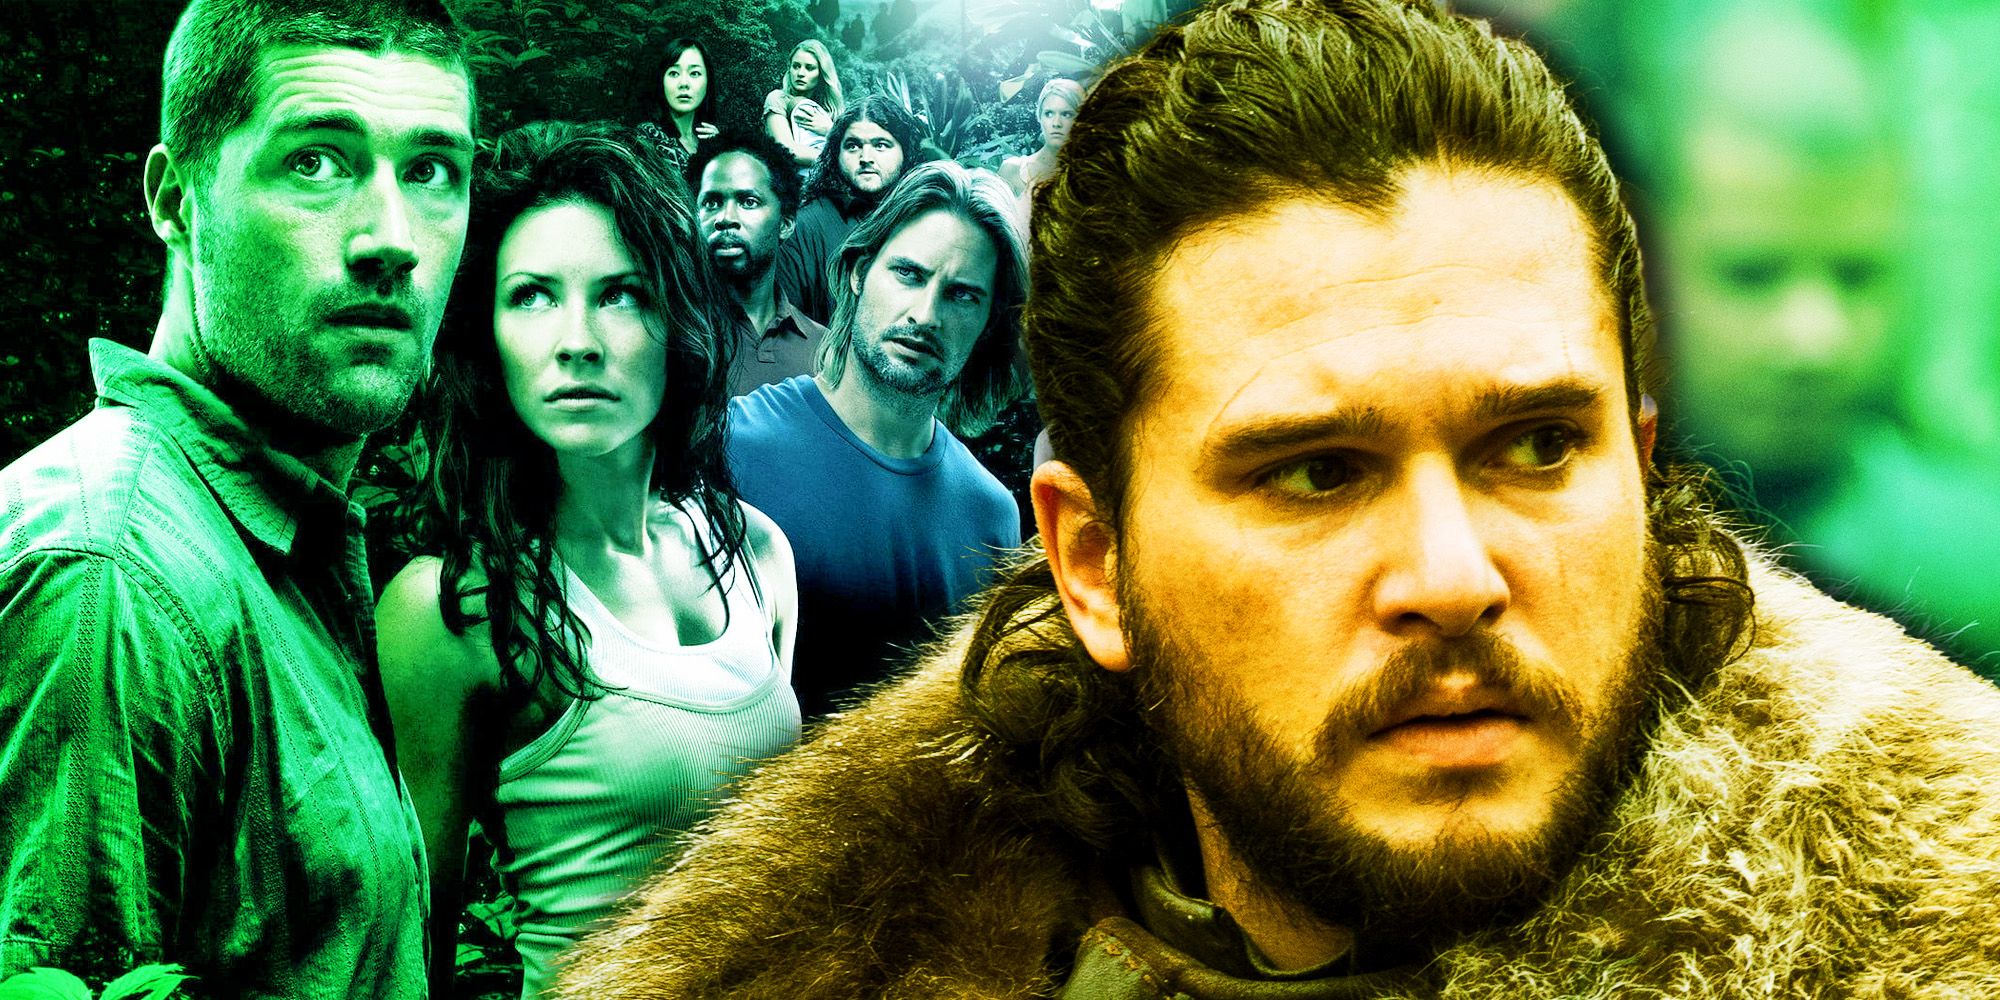 Jon Snow from Game of Thrones and the cast of LOST